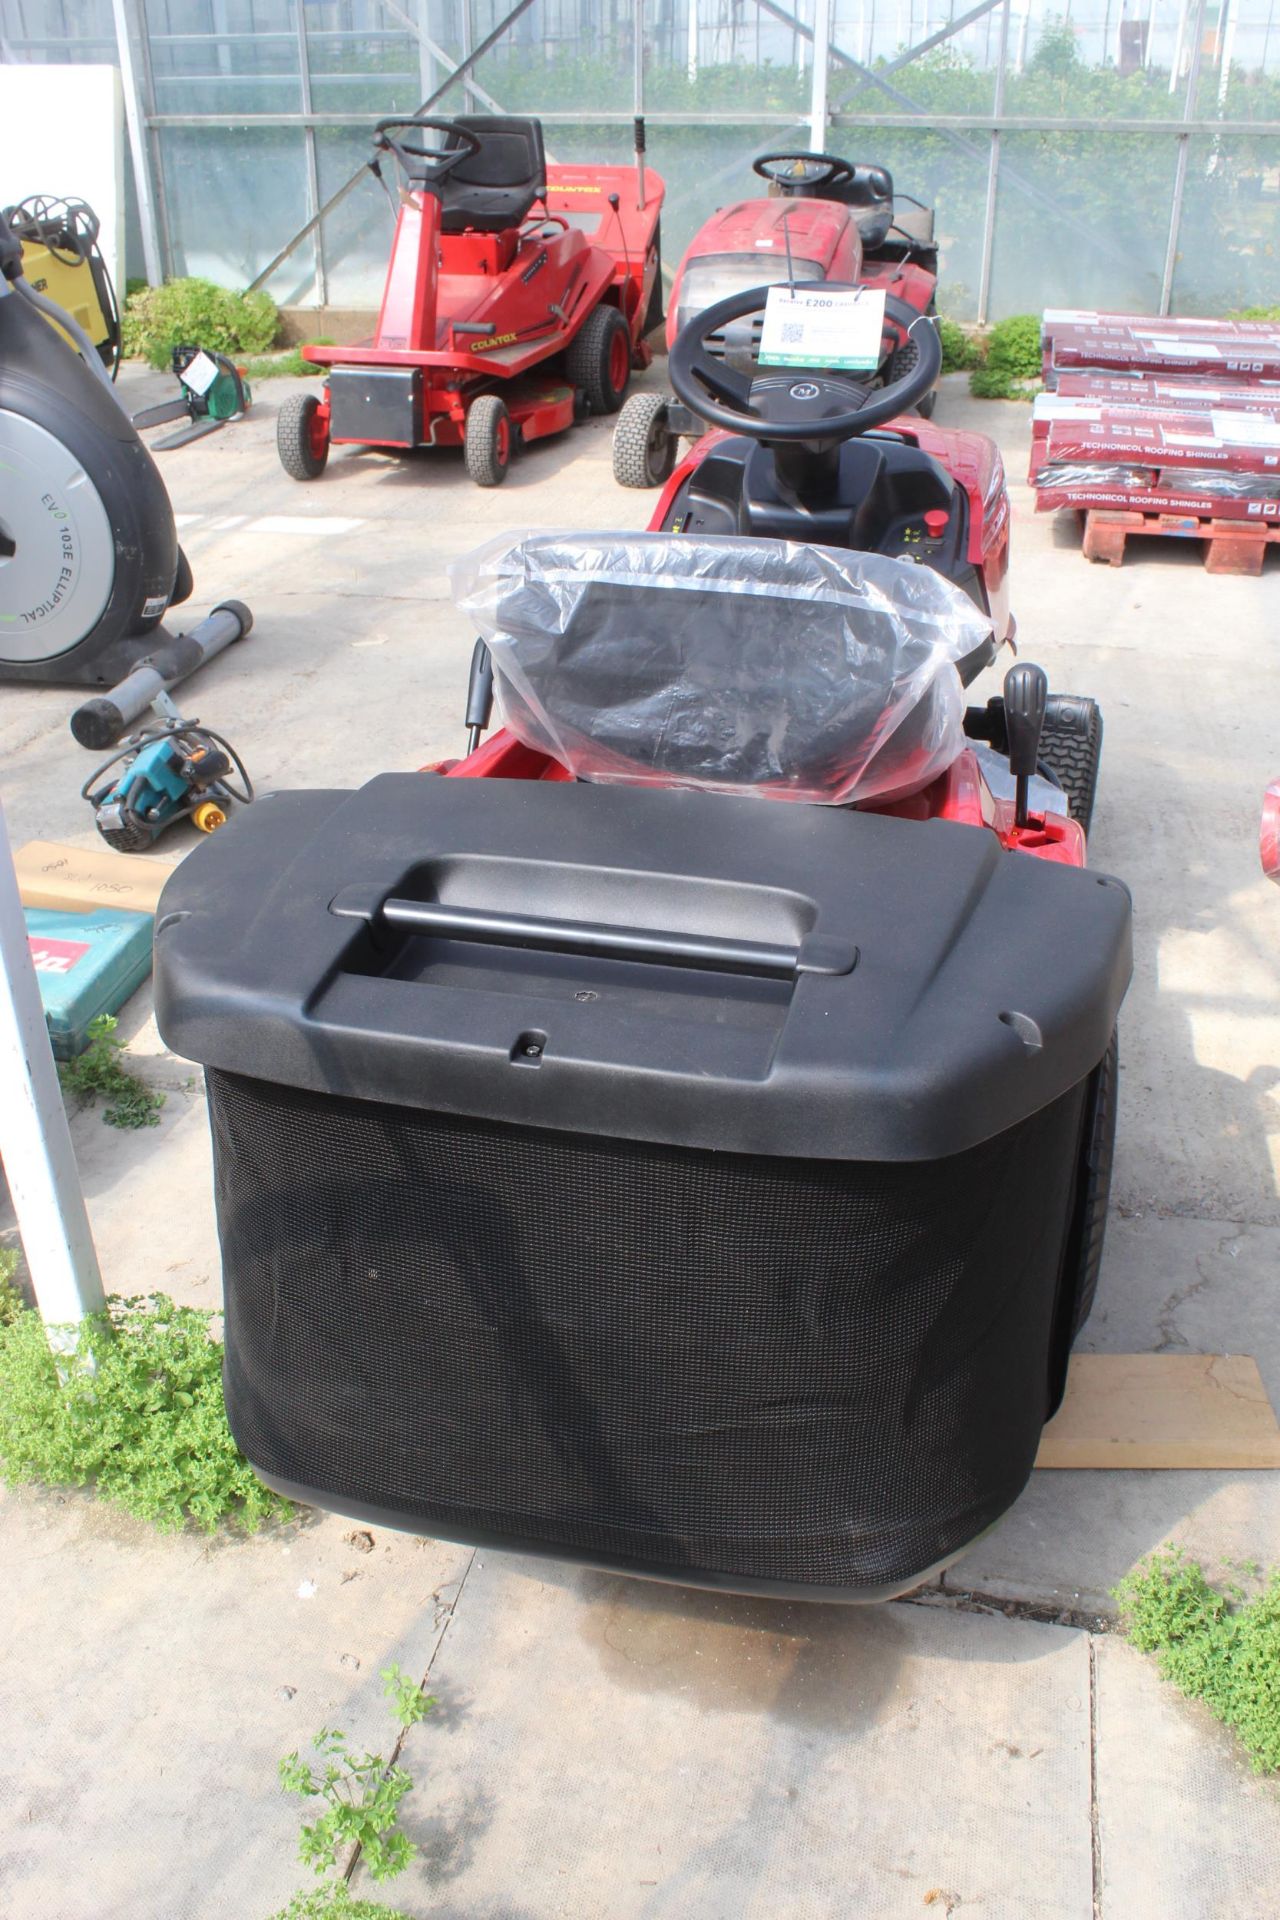 A NEW MOUNTFIELD T30M RIDE ON LAWN MOWER COMPLETE WITH A 200L REAR GRASS BOX POWERED BY A STIGG - Image 4 of 4